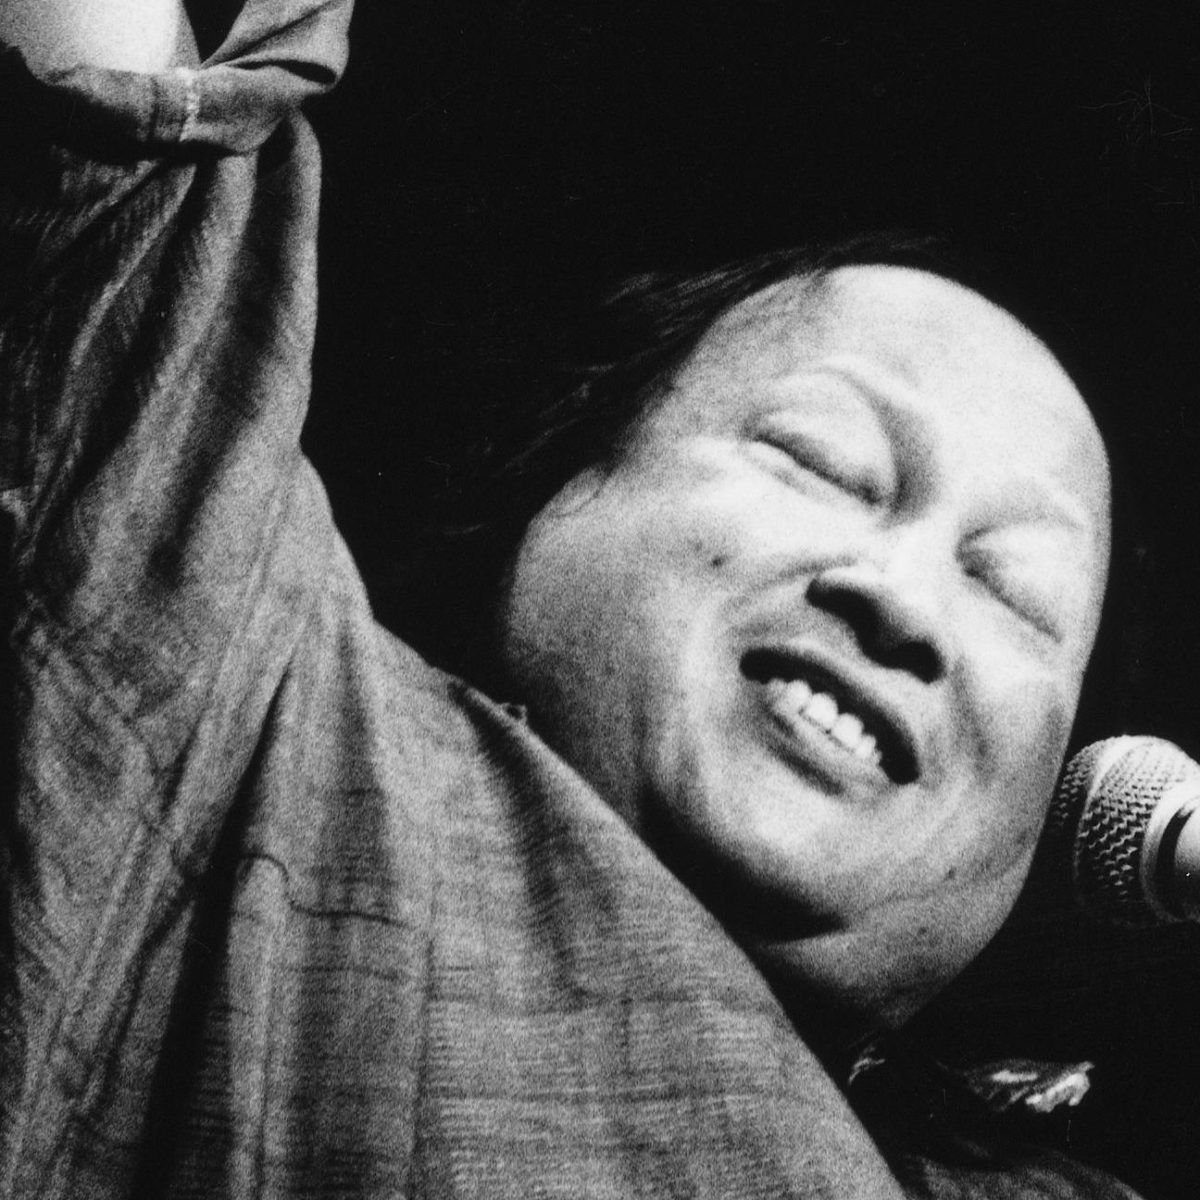 Nusrat Fateh Ali Khan at WOMAD 1985: Were you there? World